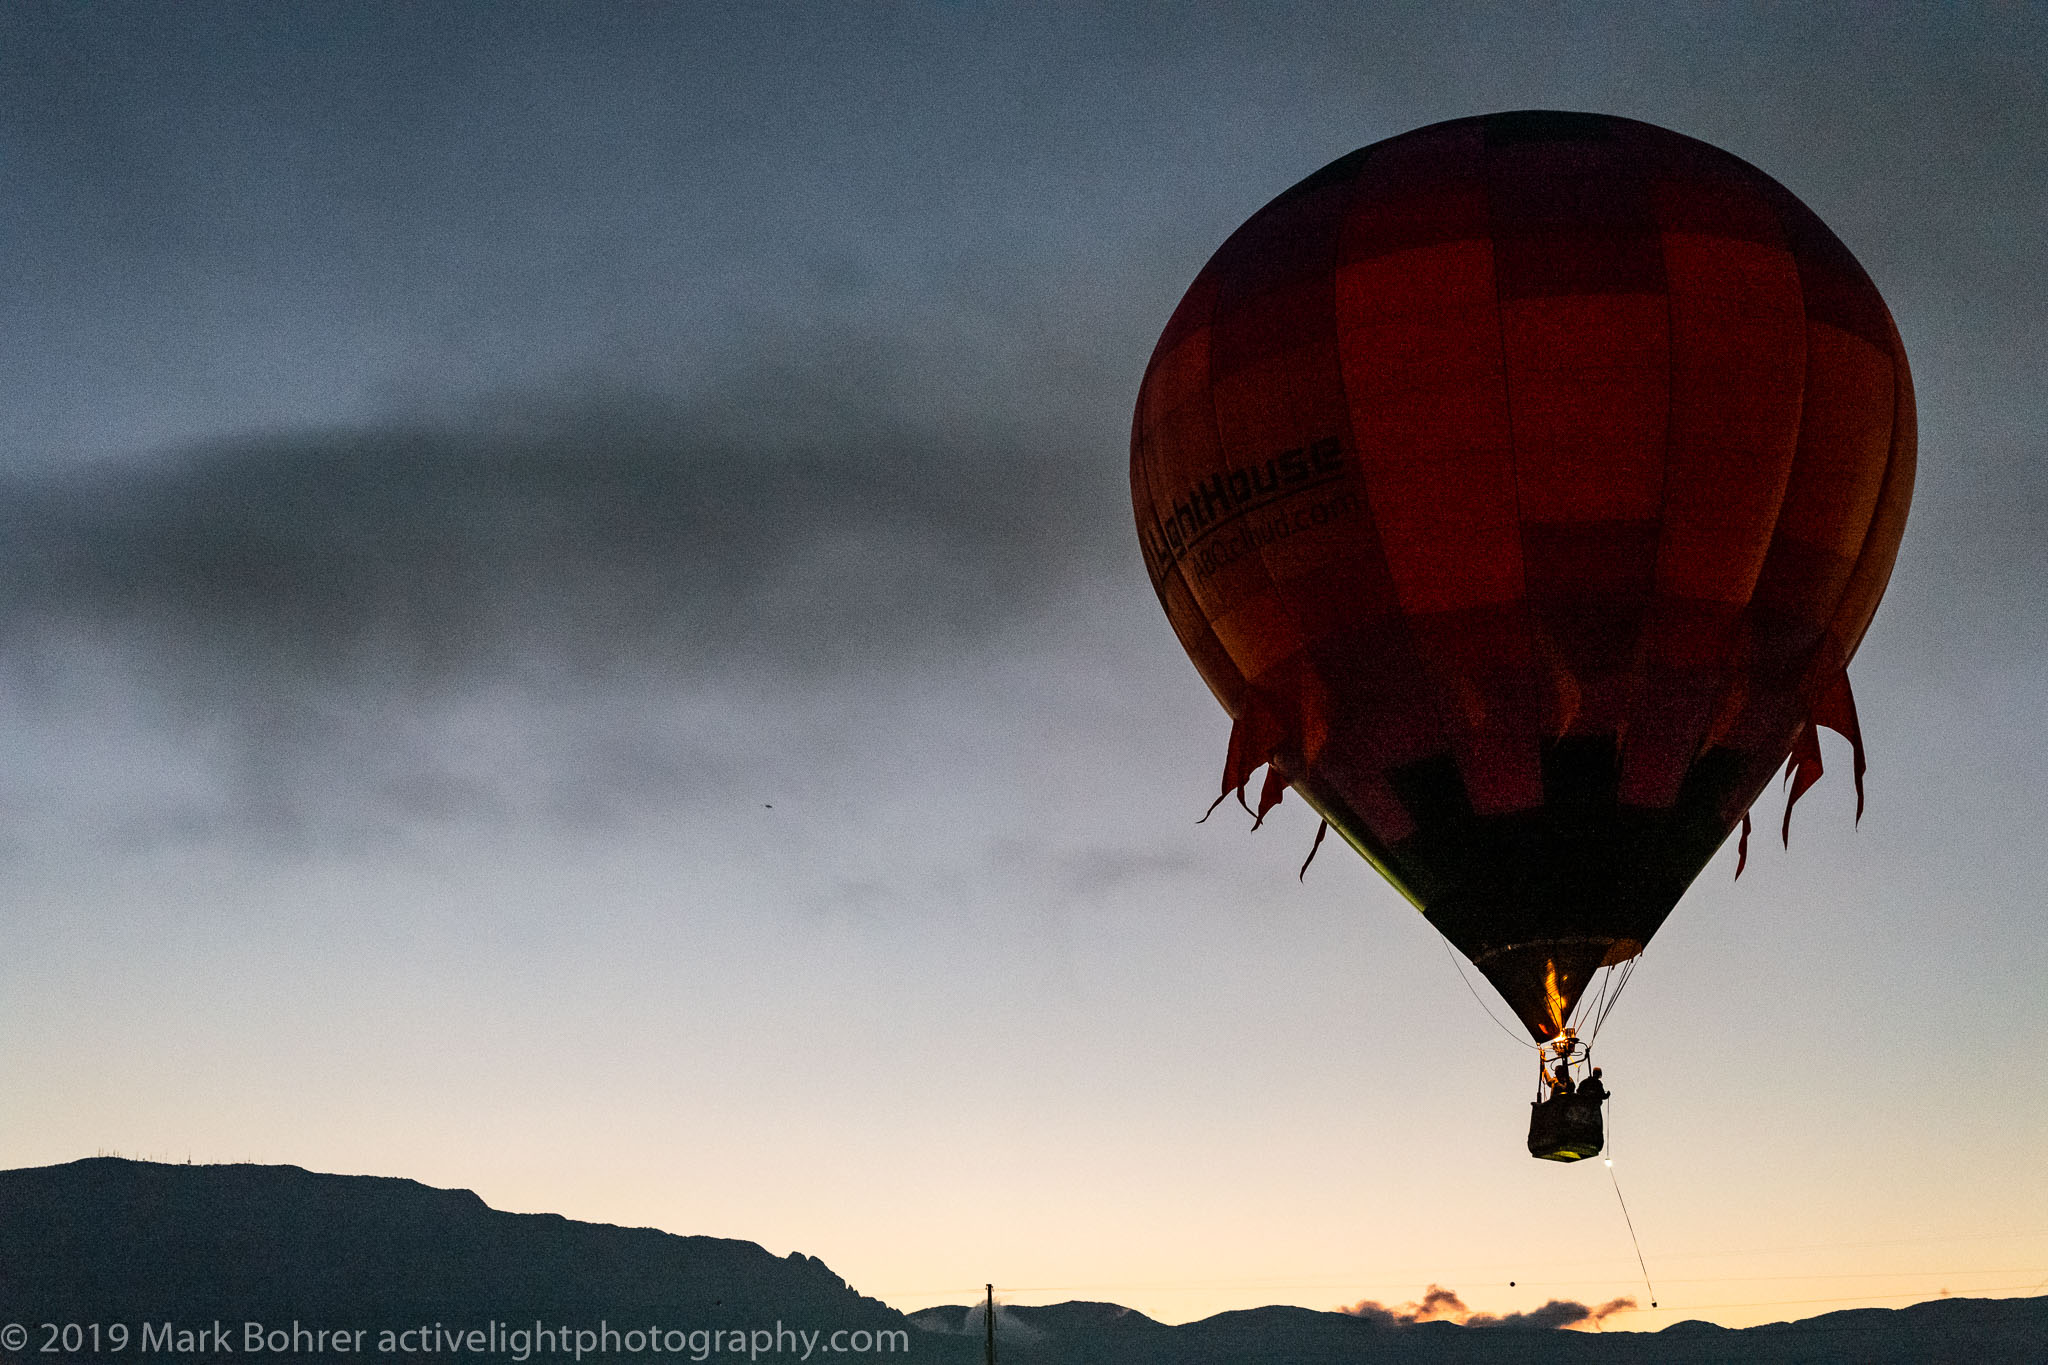 Cleared for Takeoff - Albuquerque International Balloon Fiesta, Active Light Photography